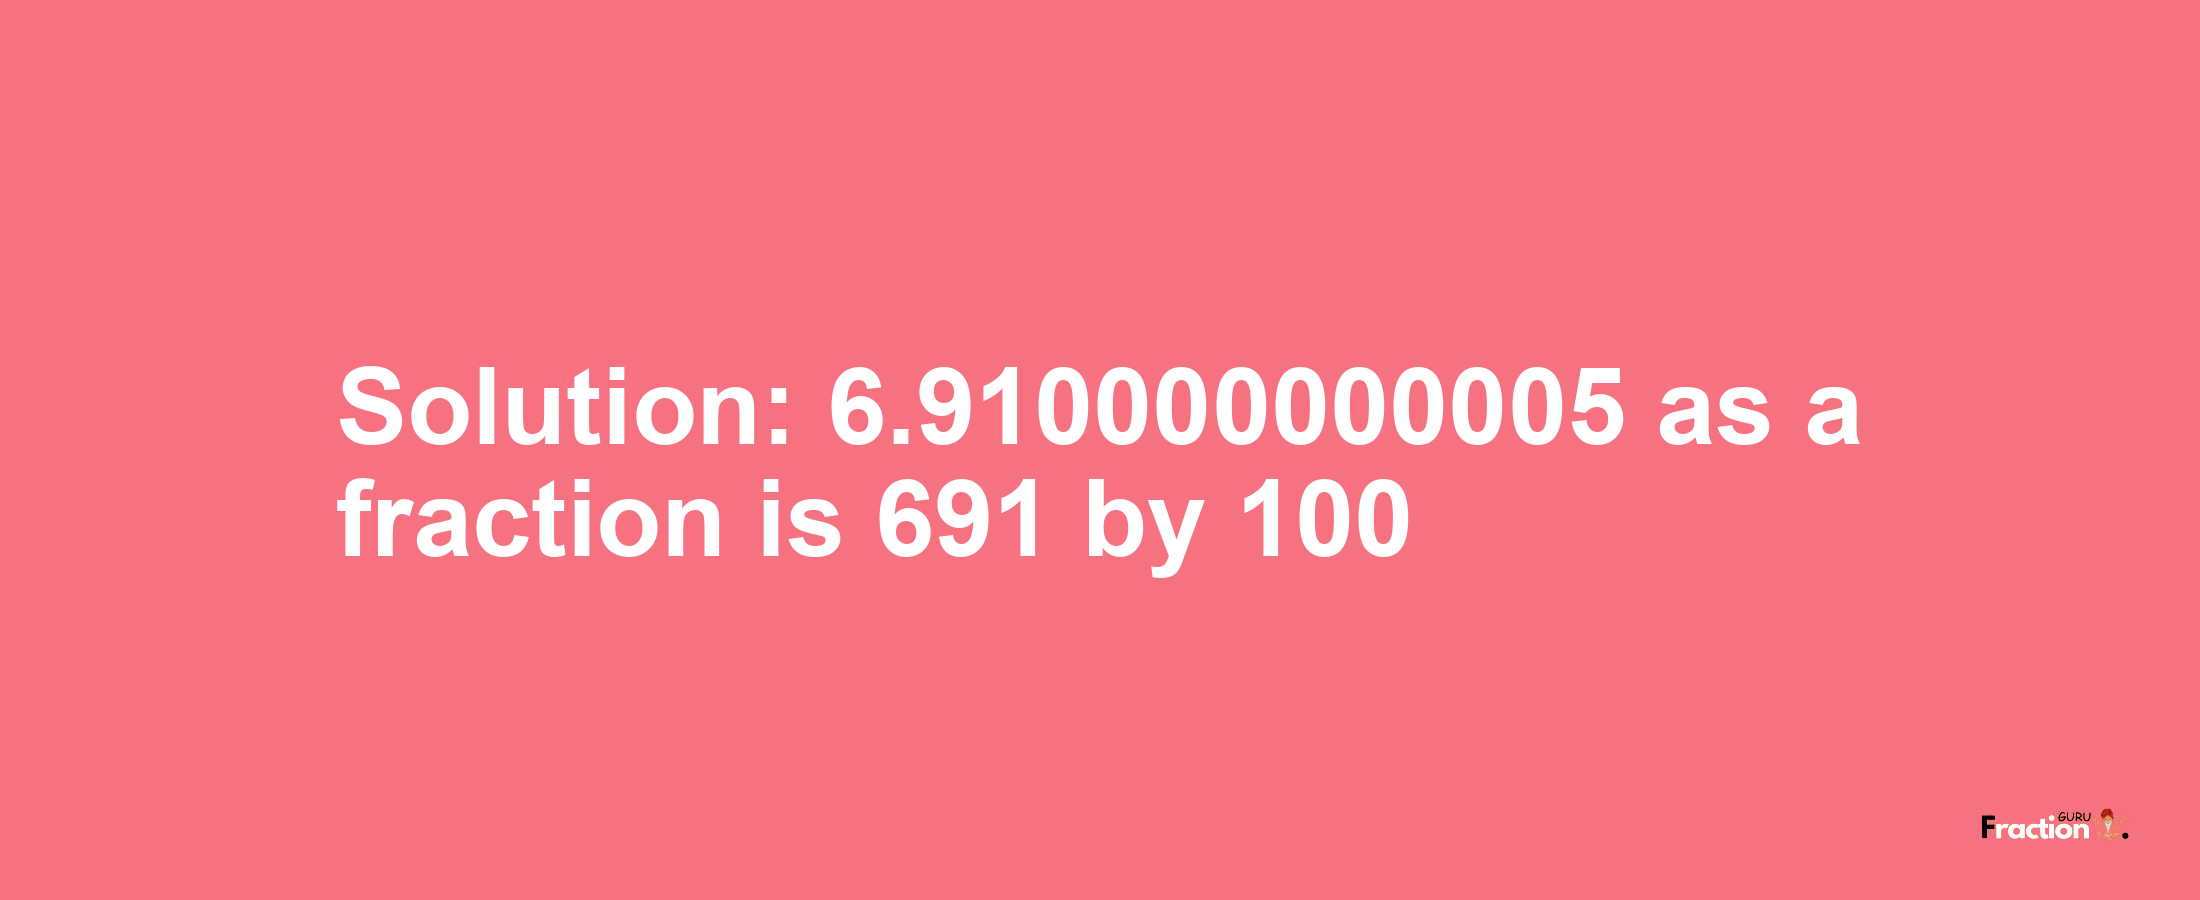 Solution:6.910000000005 as a fraction is 691/100